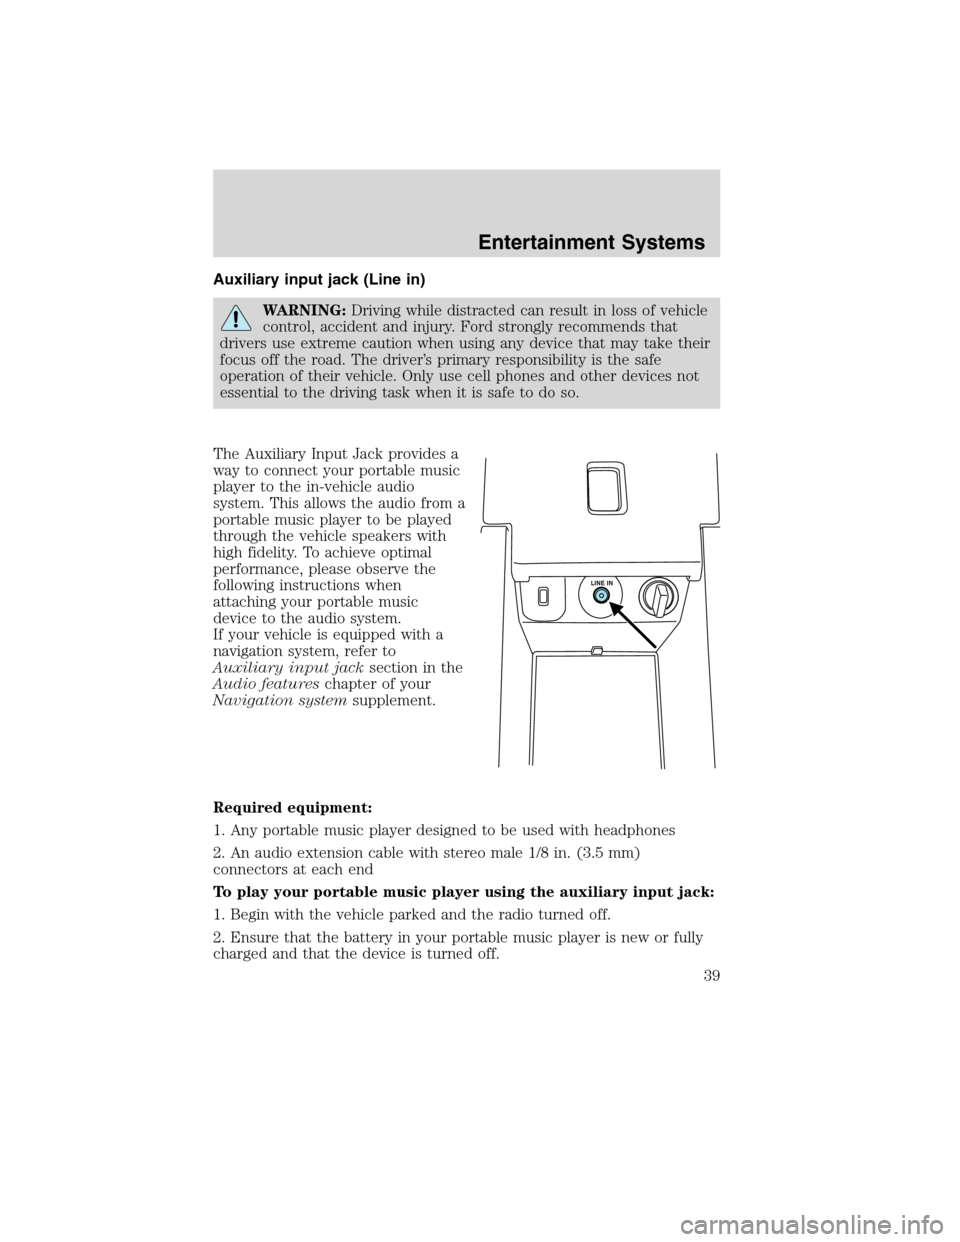 LINCOLN MKS 2010 Owners Guide Auxiliary input jack (Line in)
WARNING:Driving while distracted can result in loss of vehicle
control, accident and injury. Ford strongly recommends that
drivers use extreme caution when using any dev